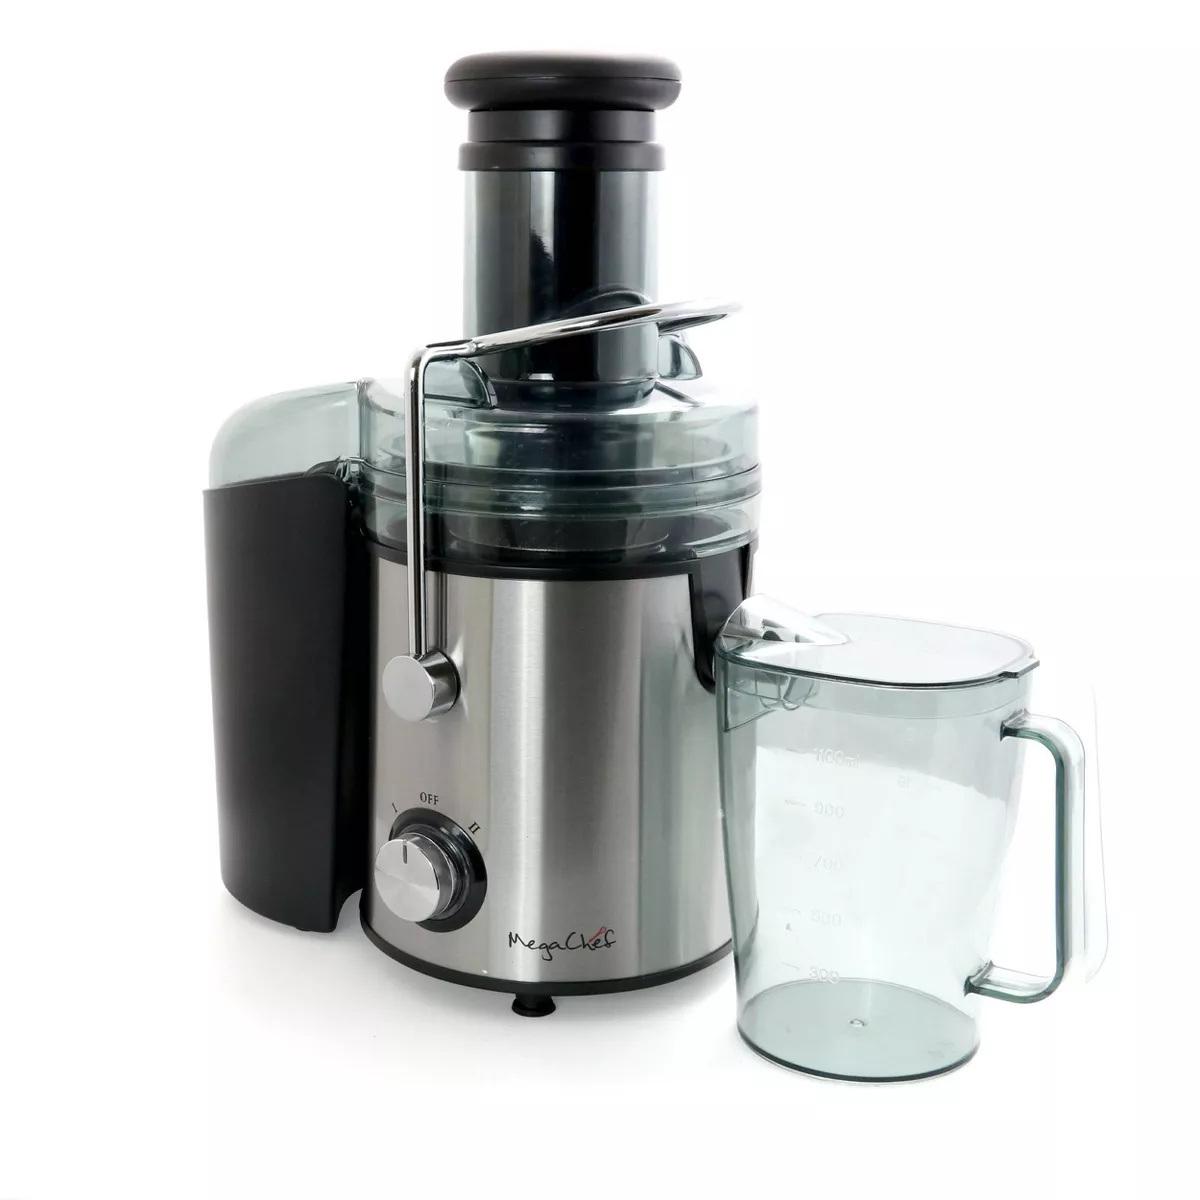 Stainless steel juicer with plastic pitcher